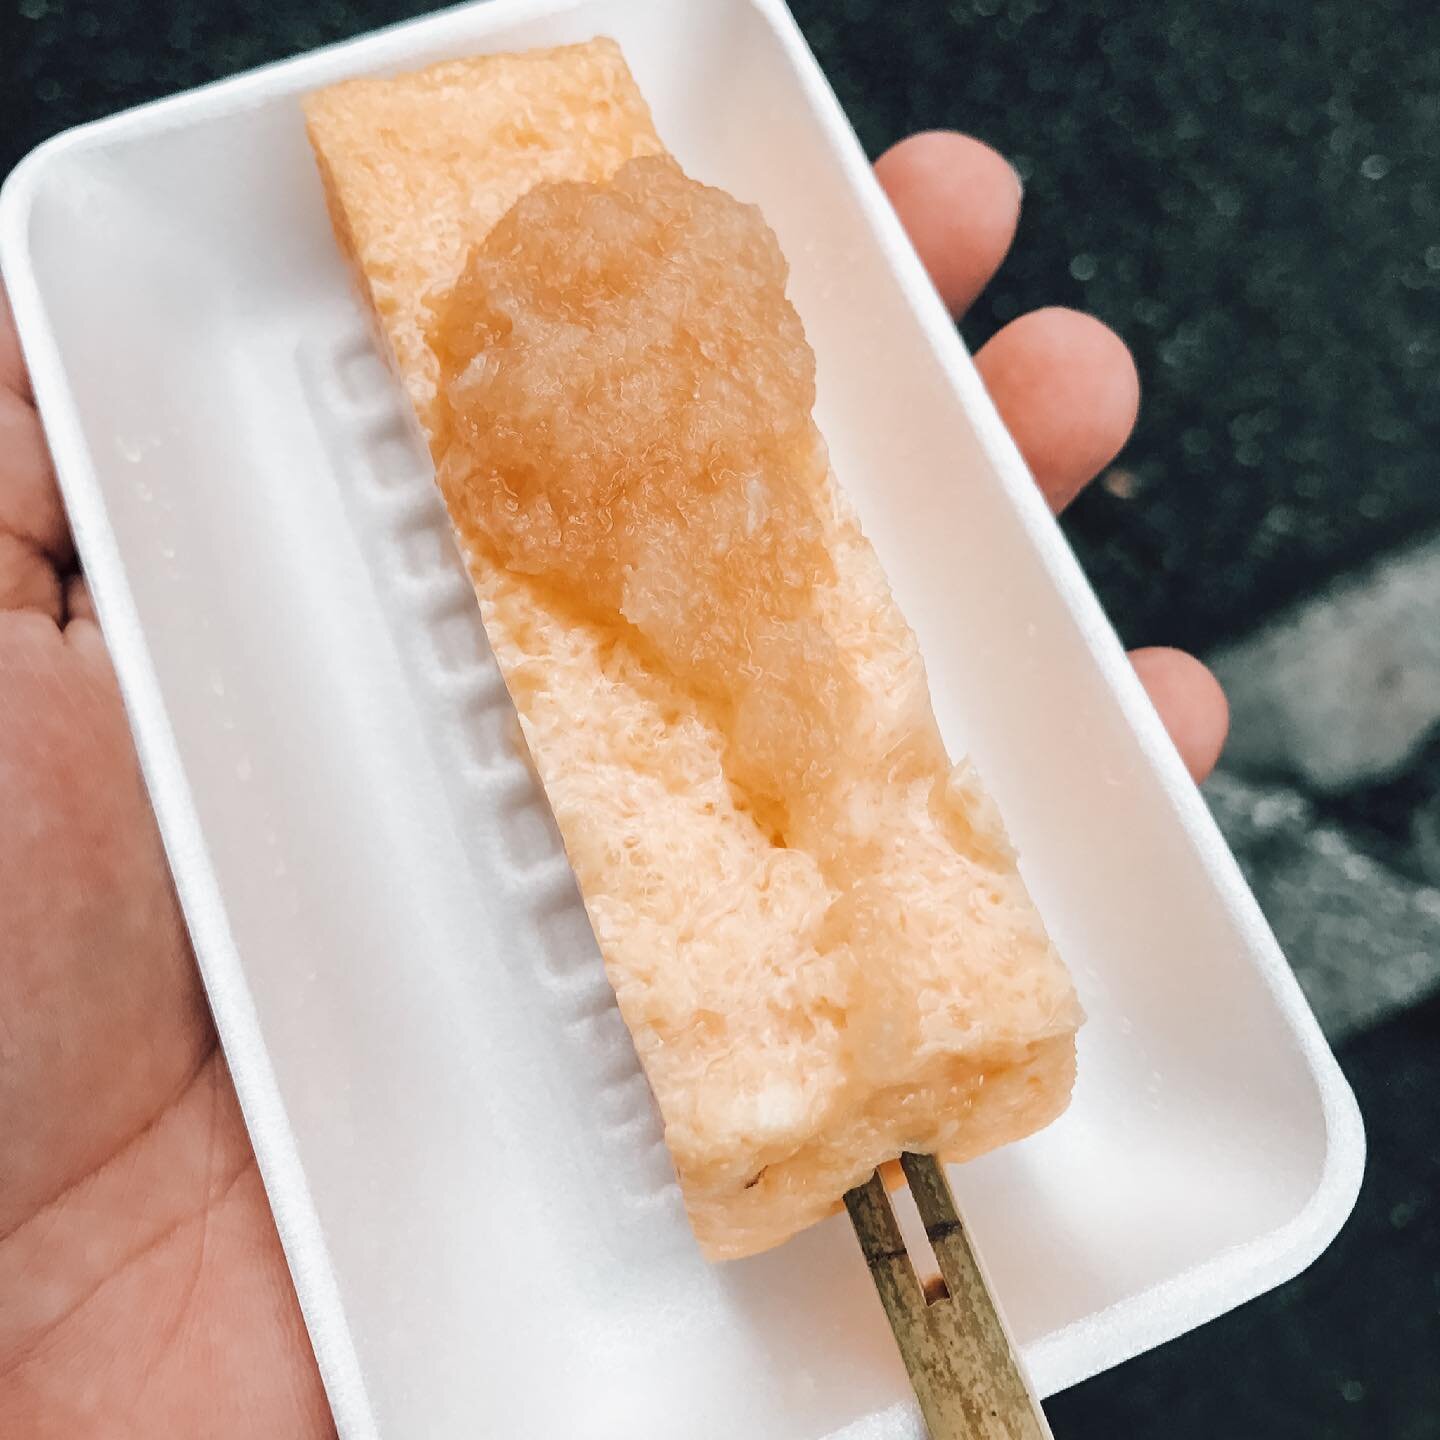 Our many finds around Tsukiji Fish Market. Special shoutout to the tamagoyaki, Japanese rolled omelet. A perfect mix of sweet and savory for your tastebuds. There are different versions all around the market. 

We can help you find the best stops to 